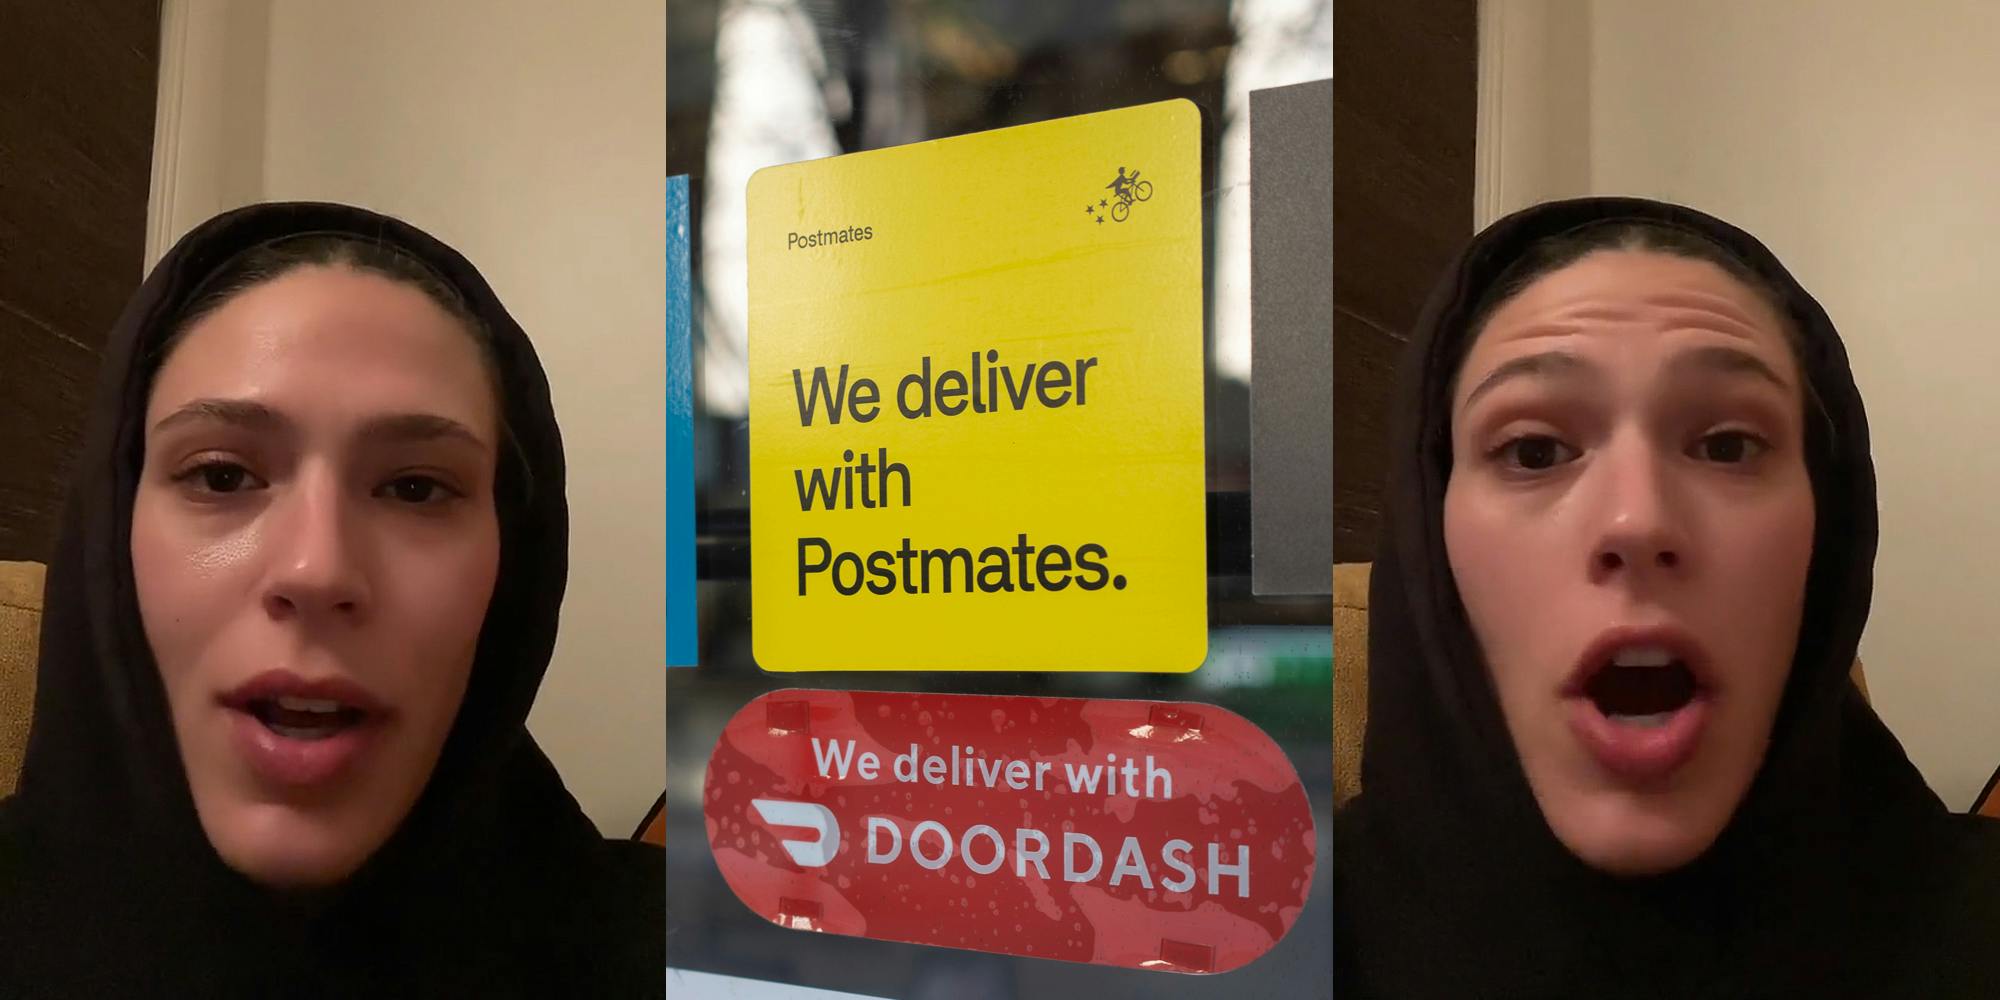 Postmates customer speaking in front of white wall (l) Postmates sign on window "We deliver with Postmates" (c) Postmates customer speaking in front of white wall (r)